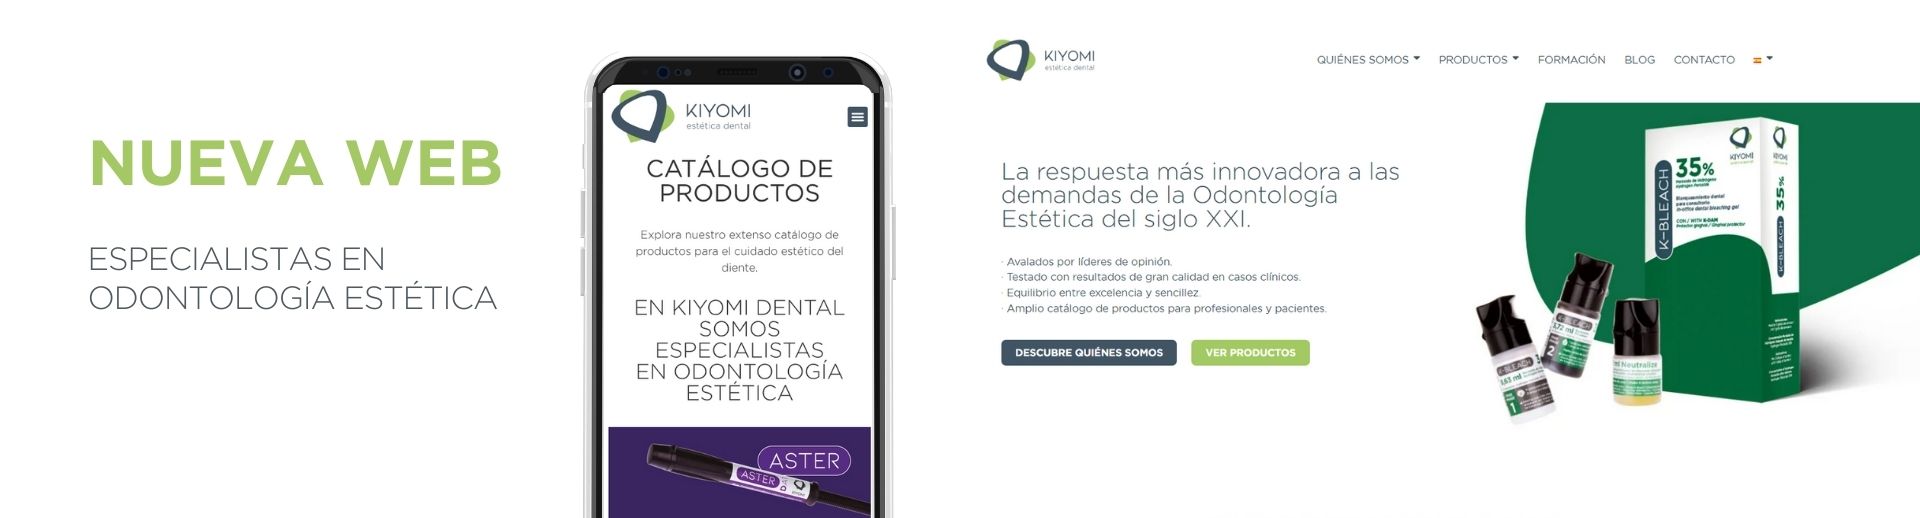 Kiyomi Dental introduces its new website, offering innovation and quality in Aesthetic Dentistry.